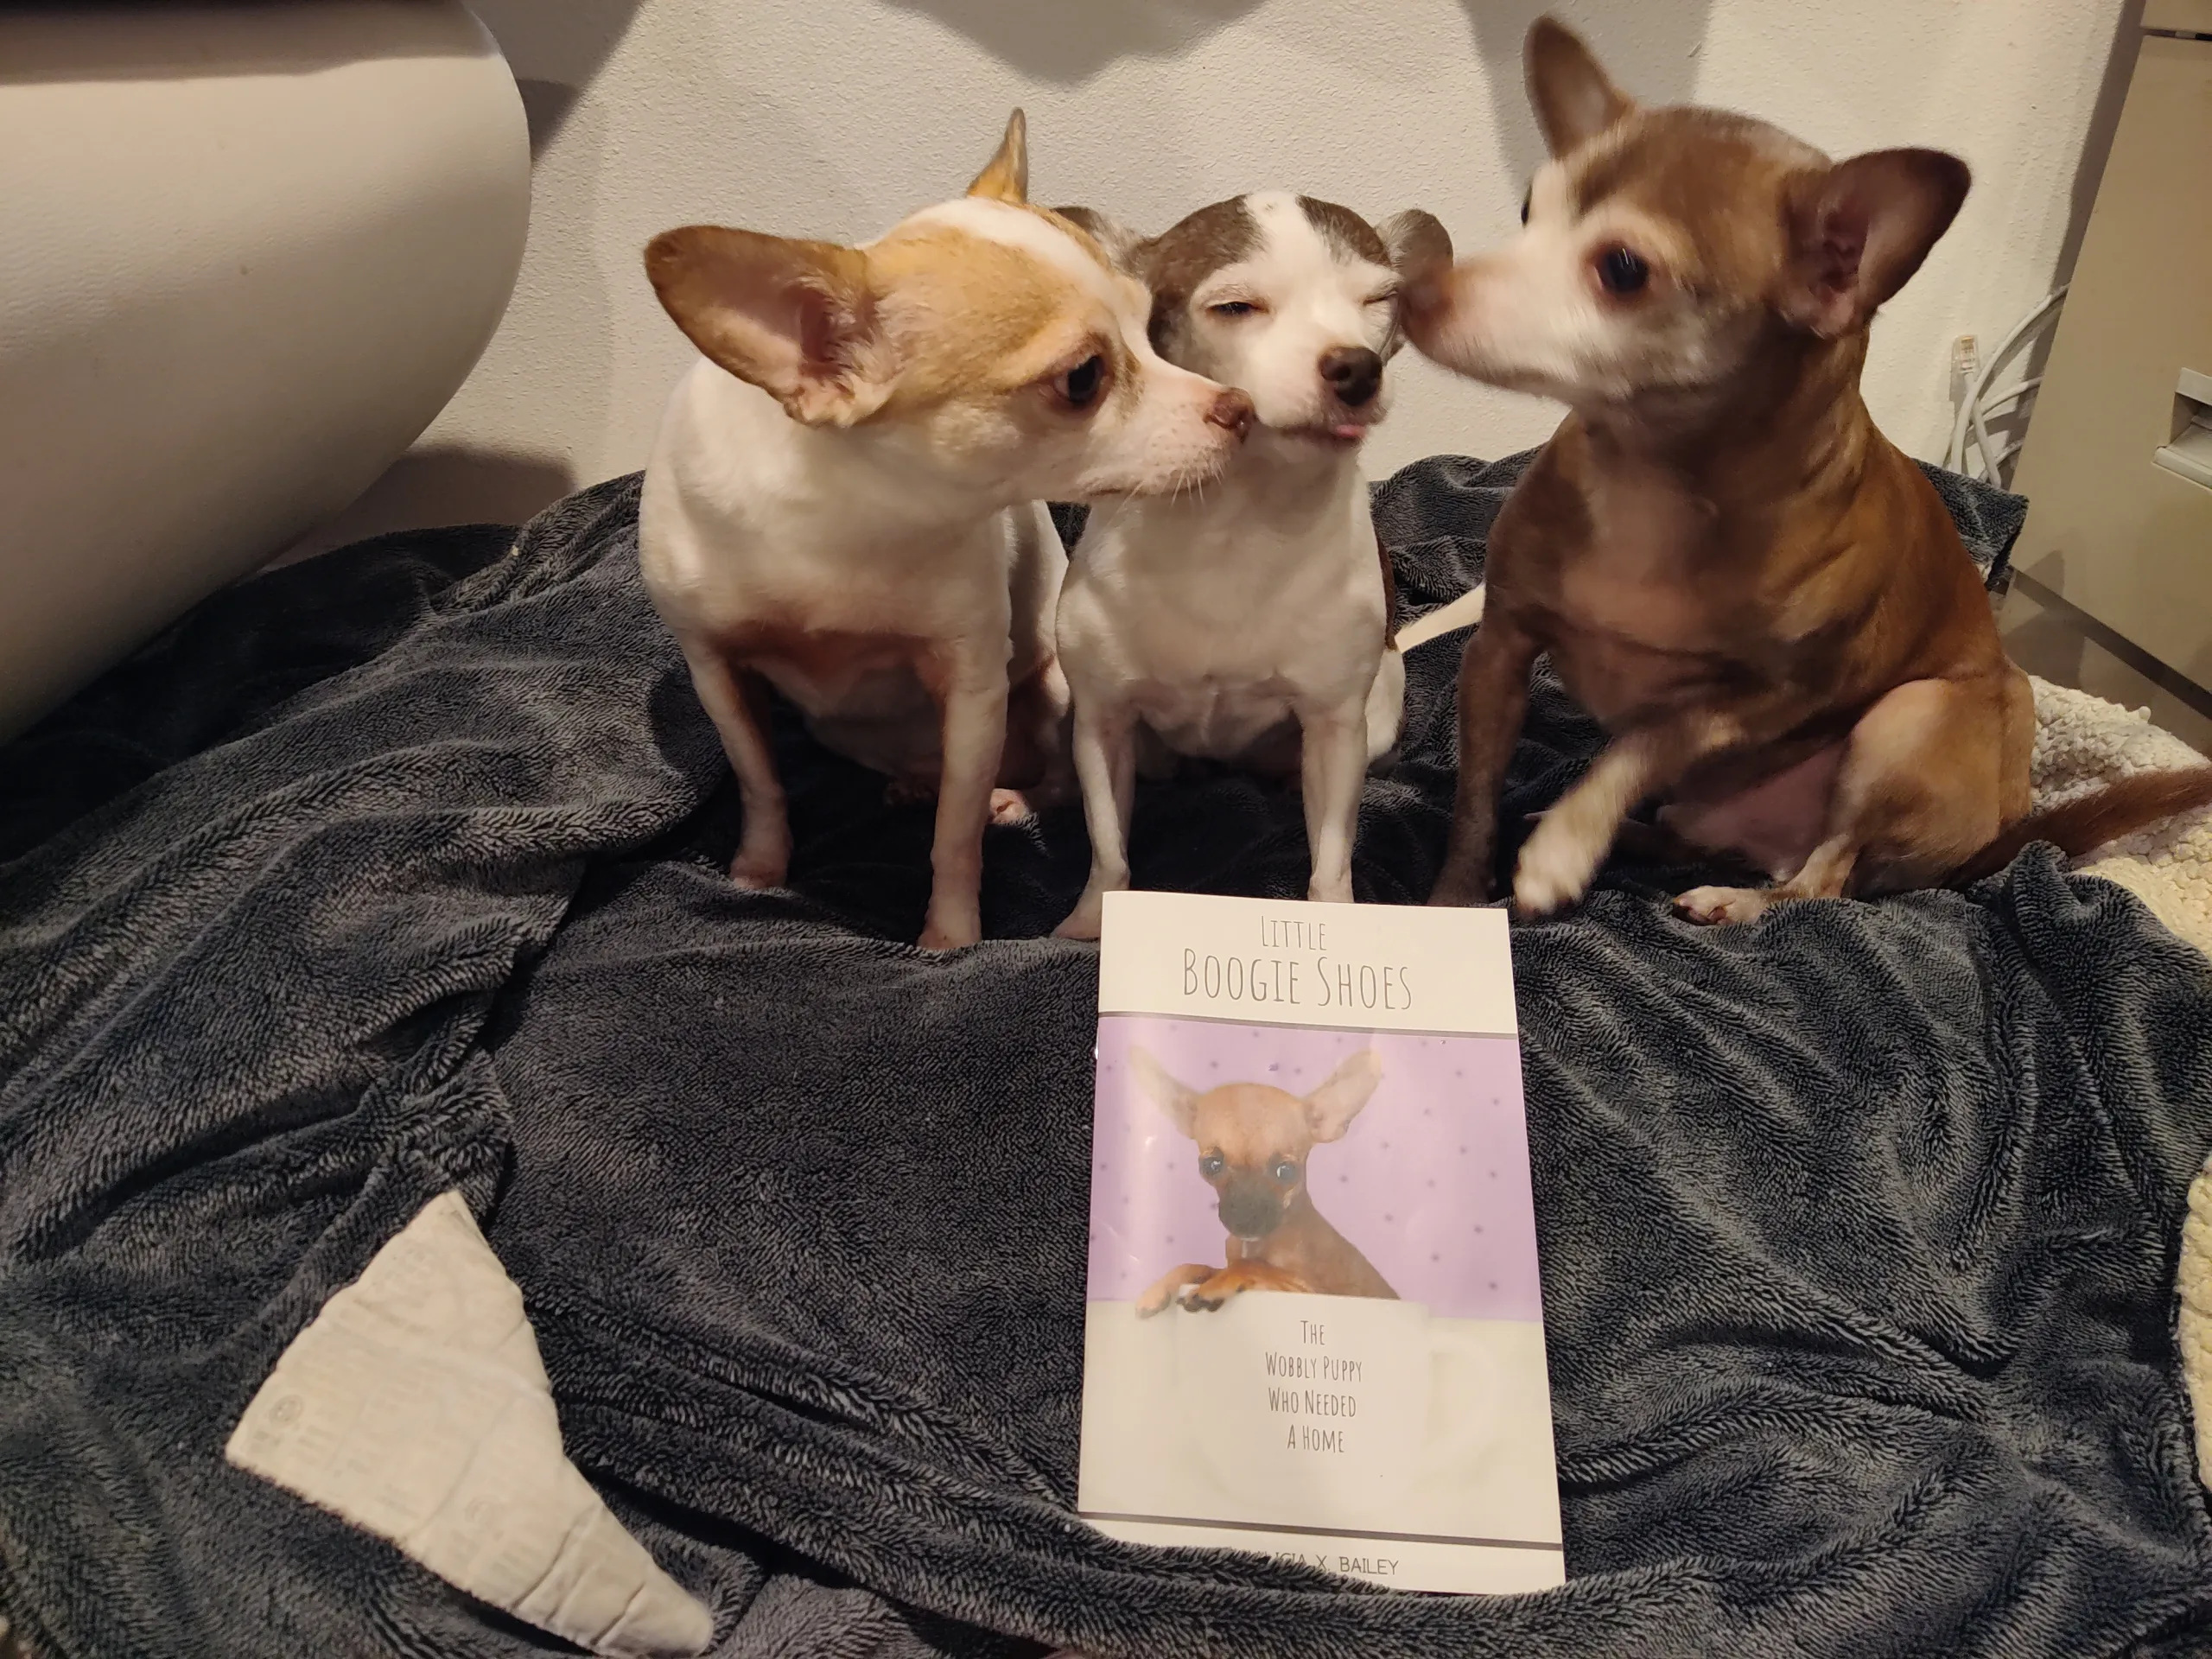 3 chihuahuas smooch over the Little Boogie Shoes book.